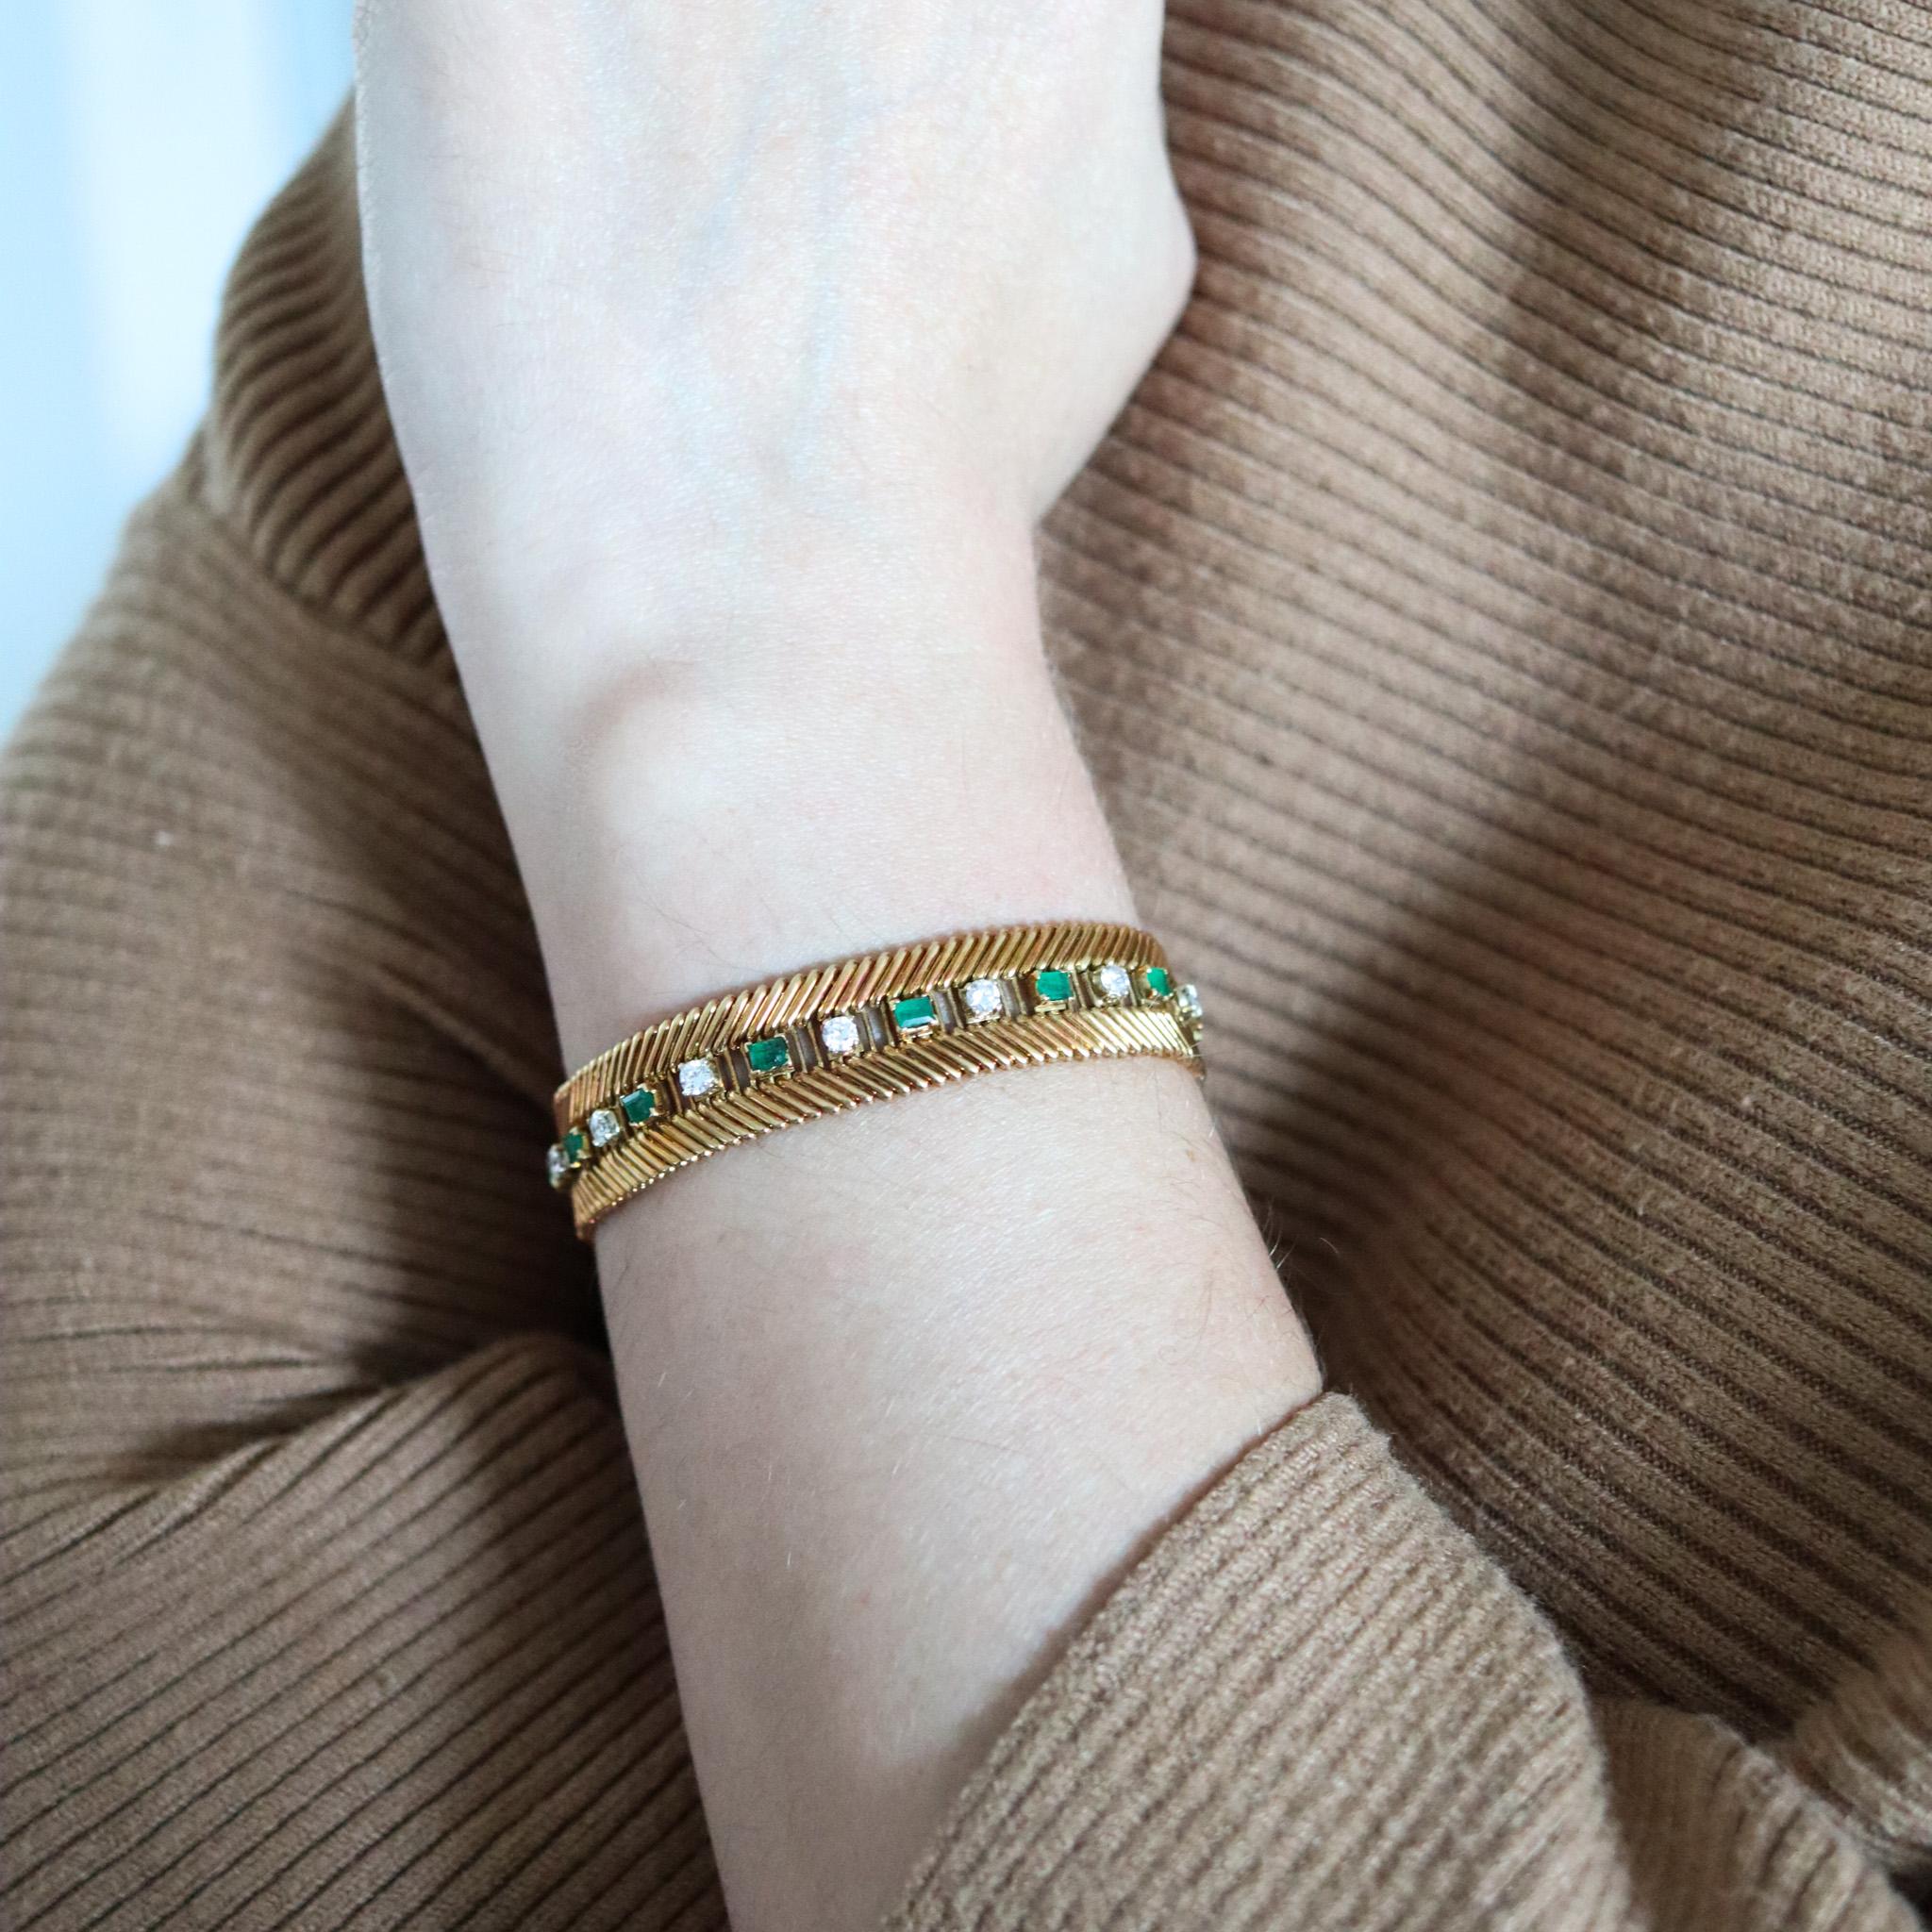 Flexible bracelet designed by Bvlgari.

An exceptional bracelet, created in Milano Italy by the iconic jewelry house of Bvlgari back in the 1950. This piece has been carefully crafted with a gorgeous craftsmanship in solid yellow gold of 18 karats